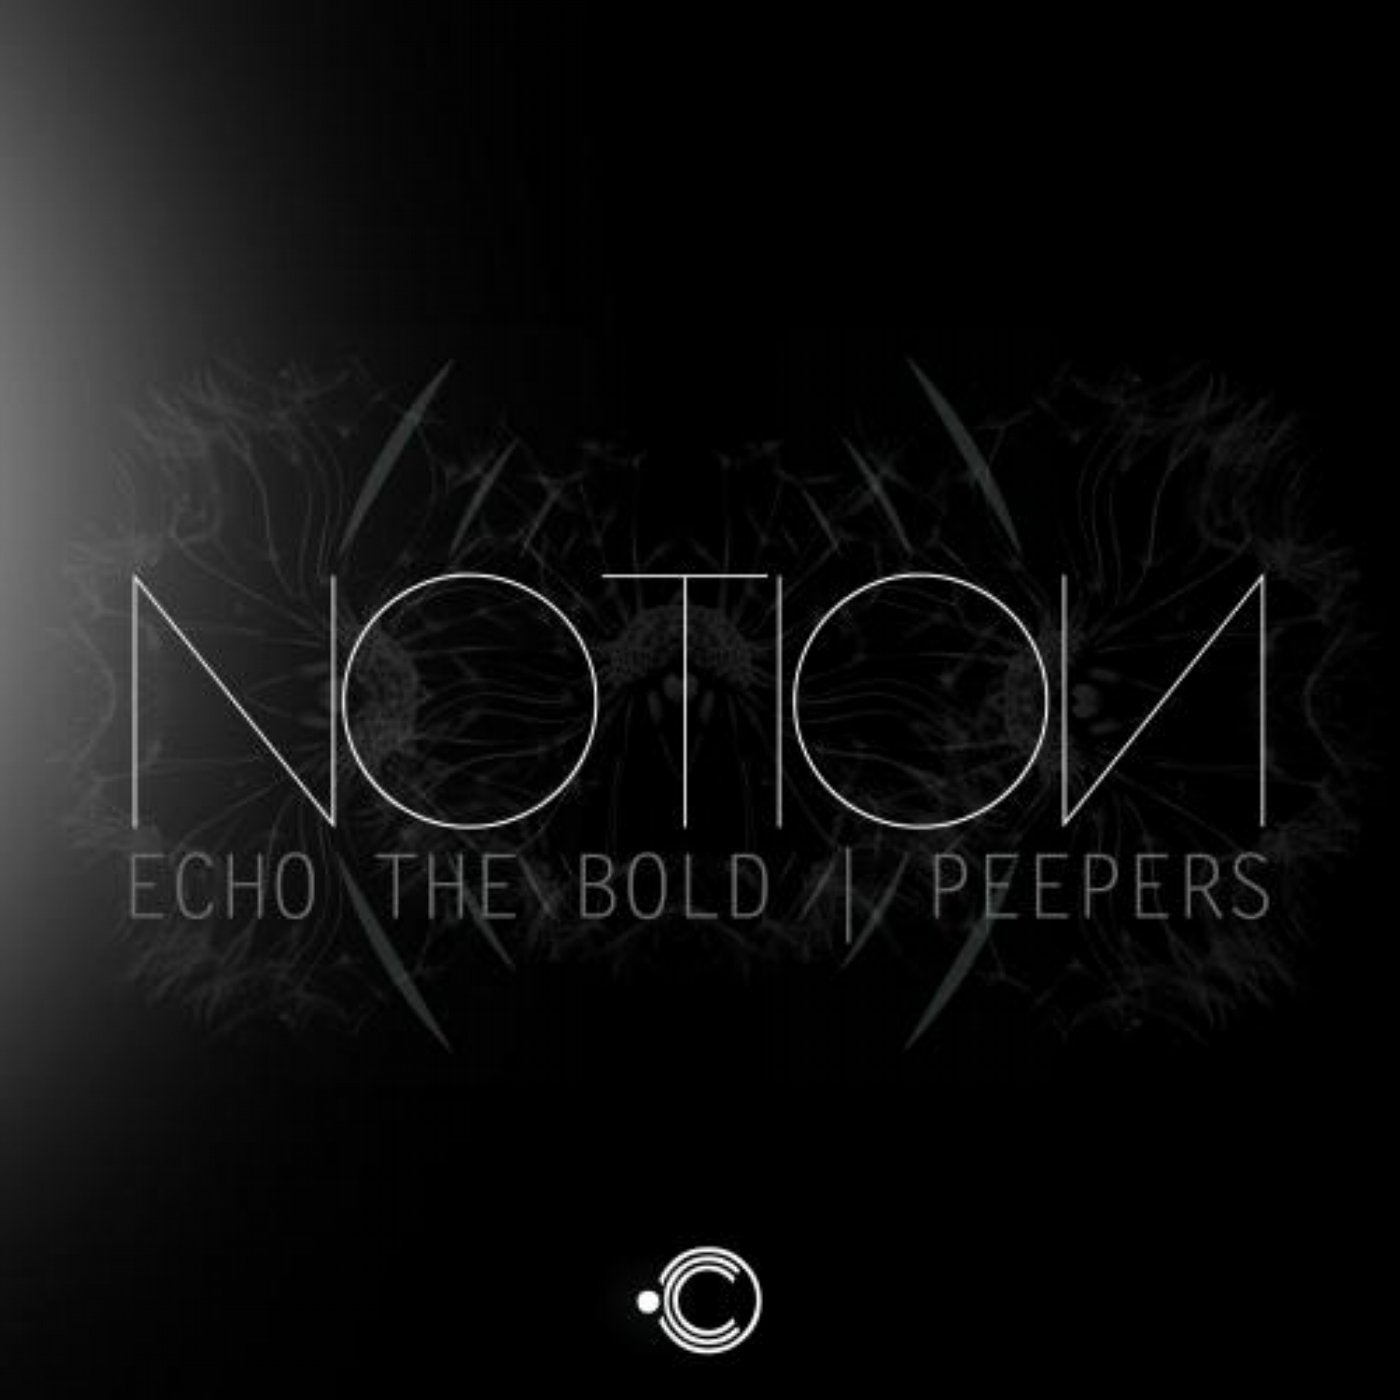 Echo The Bold / Peepers